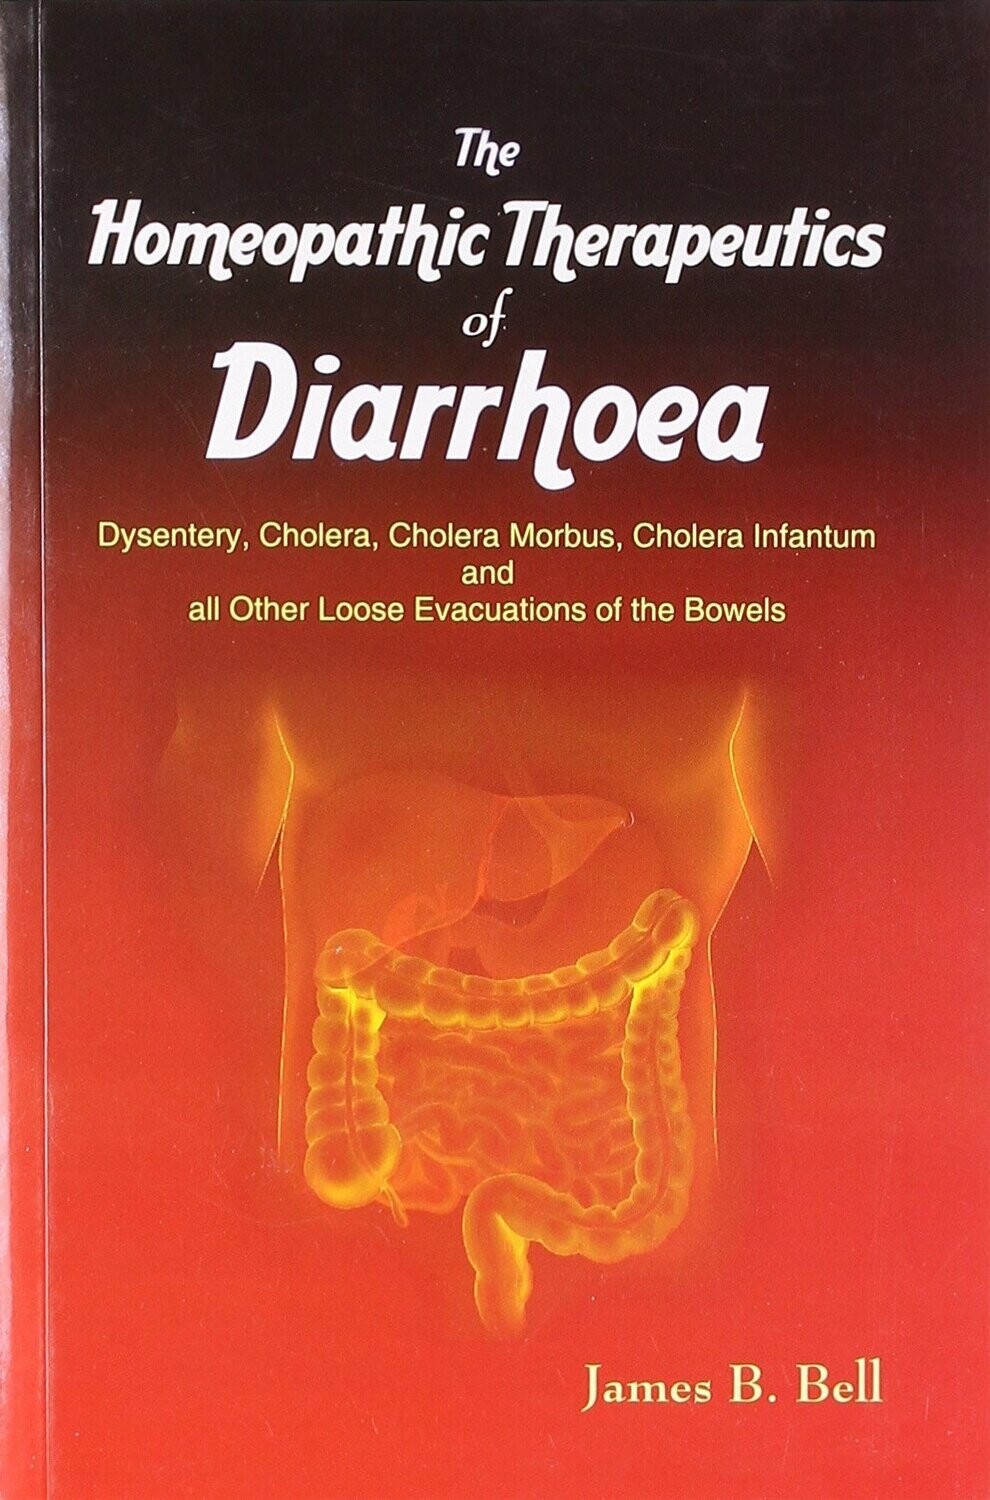 Homeopathic therapeutics of diarrhoea* (Bell)